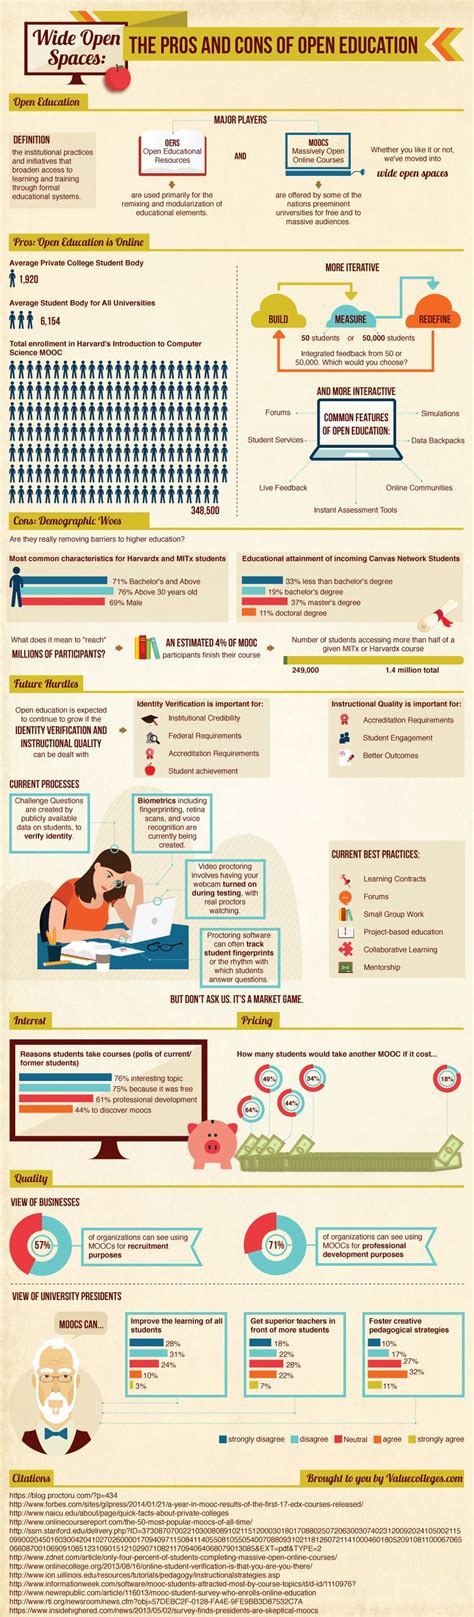 We discuss the history, importance and role of technology, as well as its impact on society. Pros and Cons of Open Education Infographic - e-Learning ...